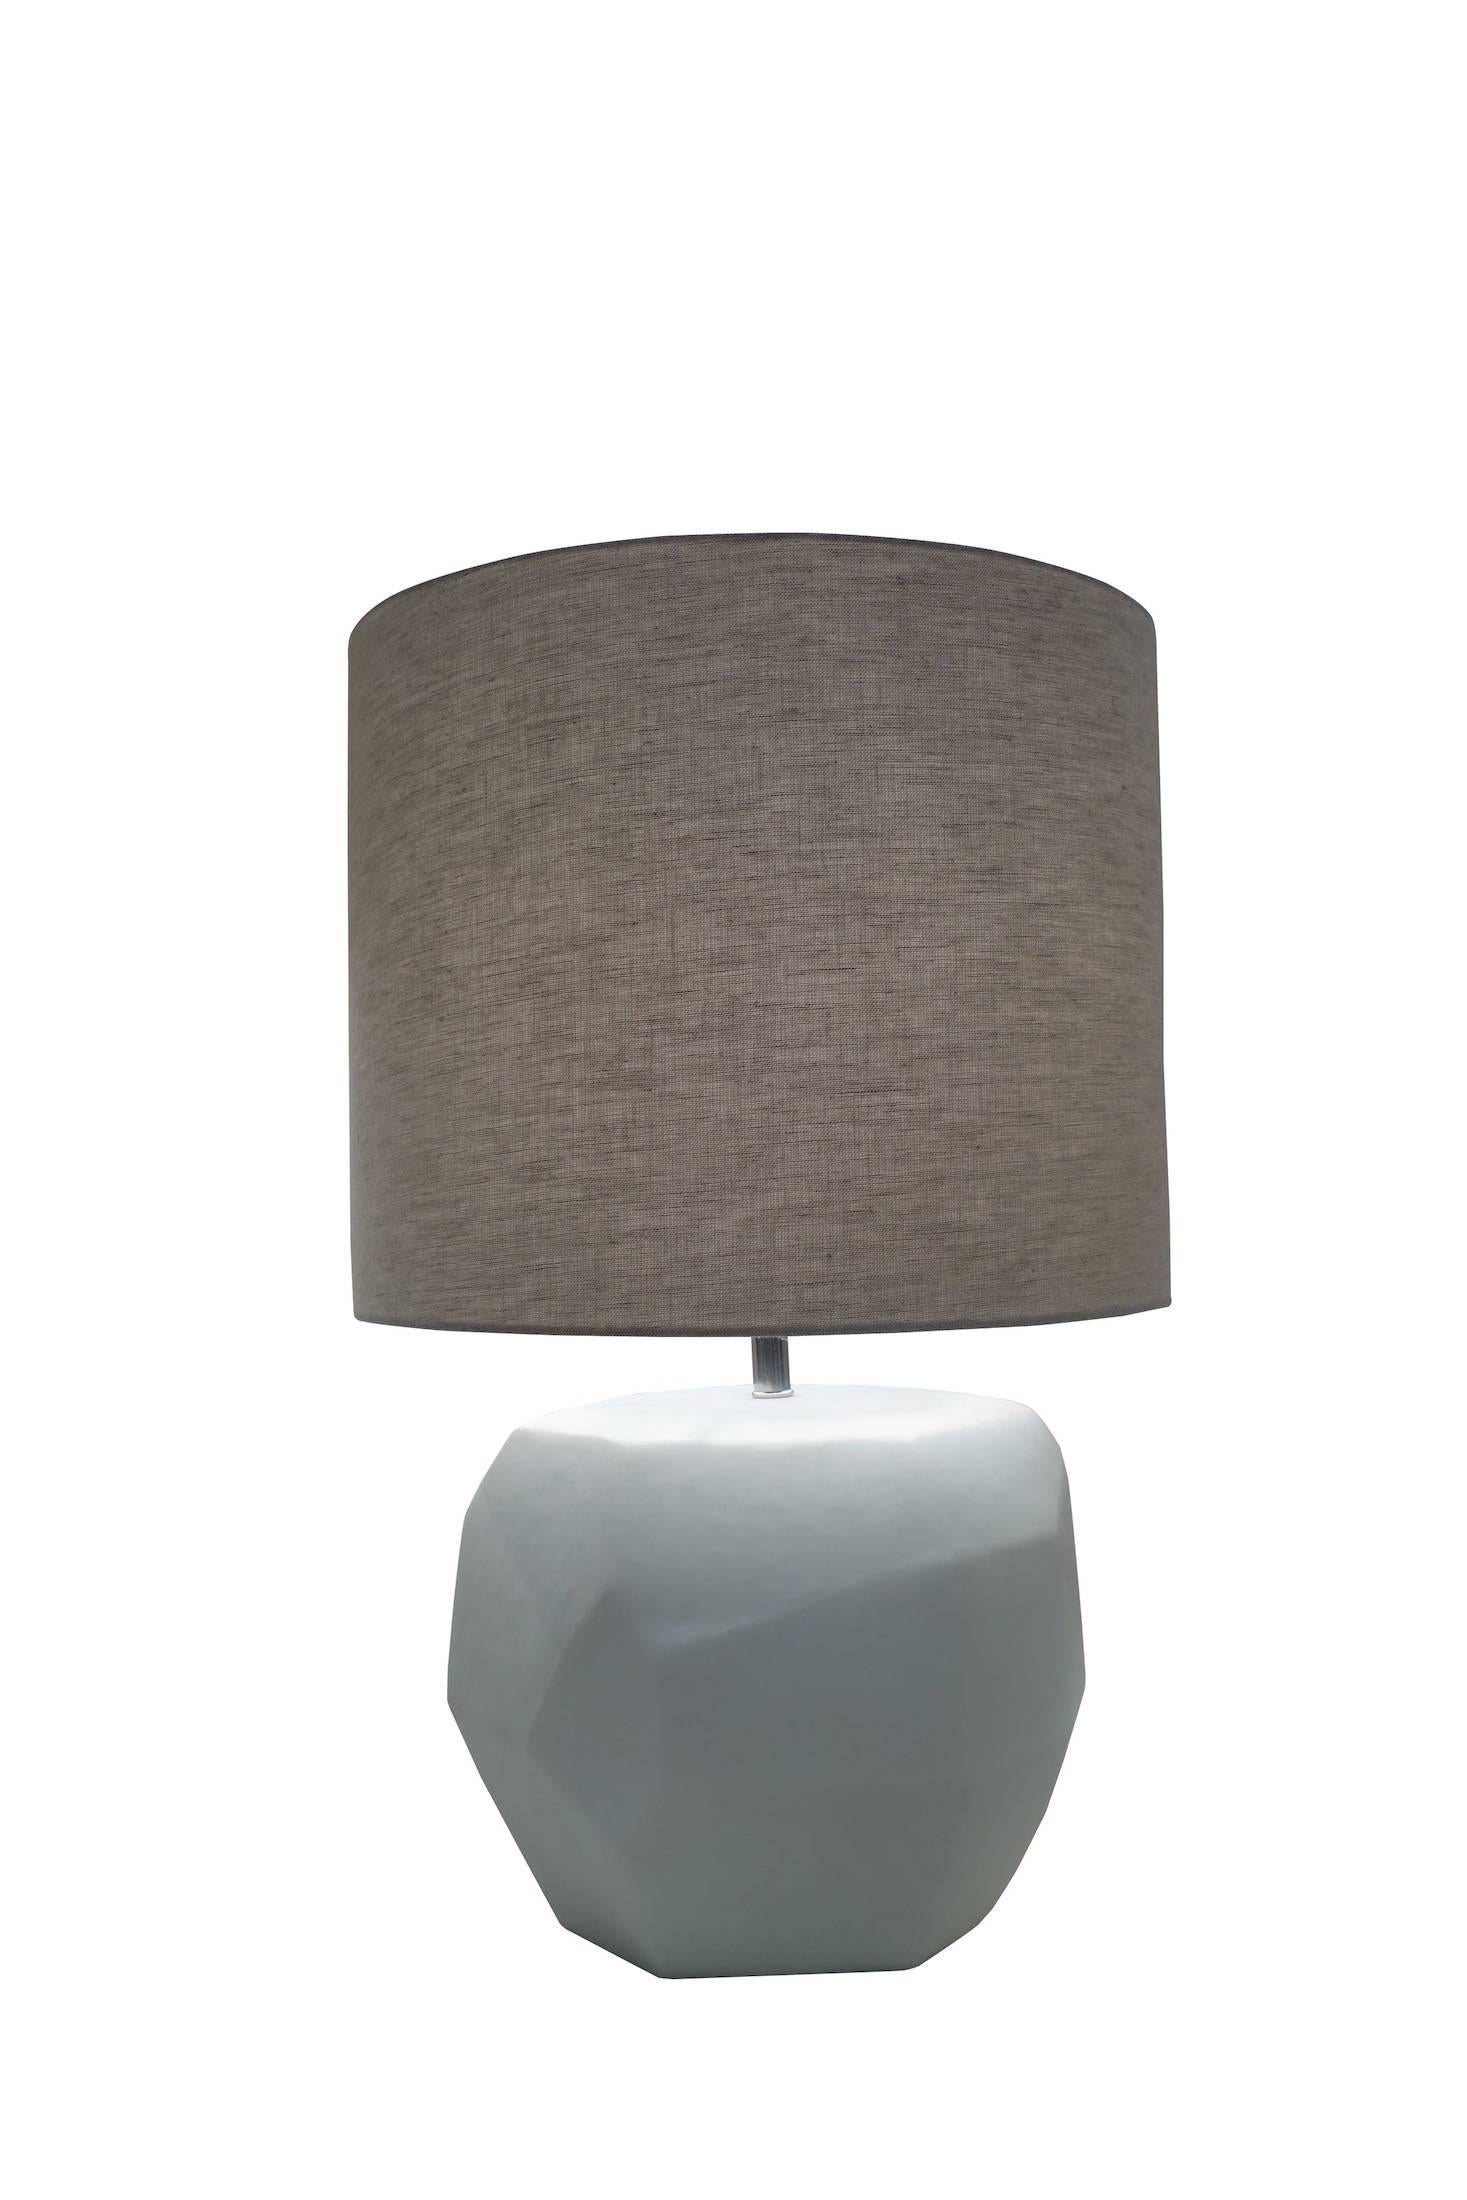 Contemporary Romanian matte white pair of lamps with cubist decorative shape.
Linen shade.
Newly wired.
Measures: Overall height with shade 25.5